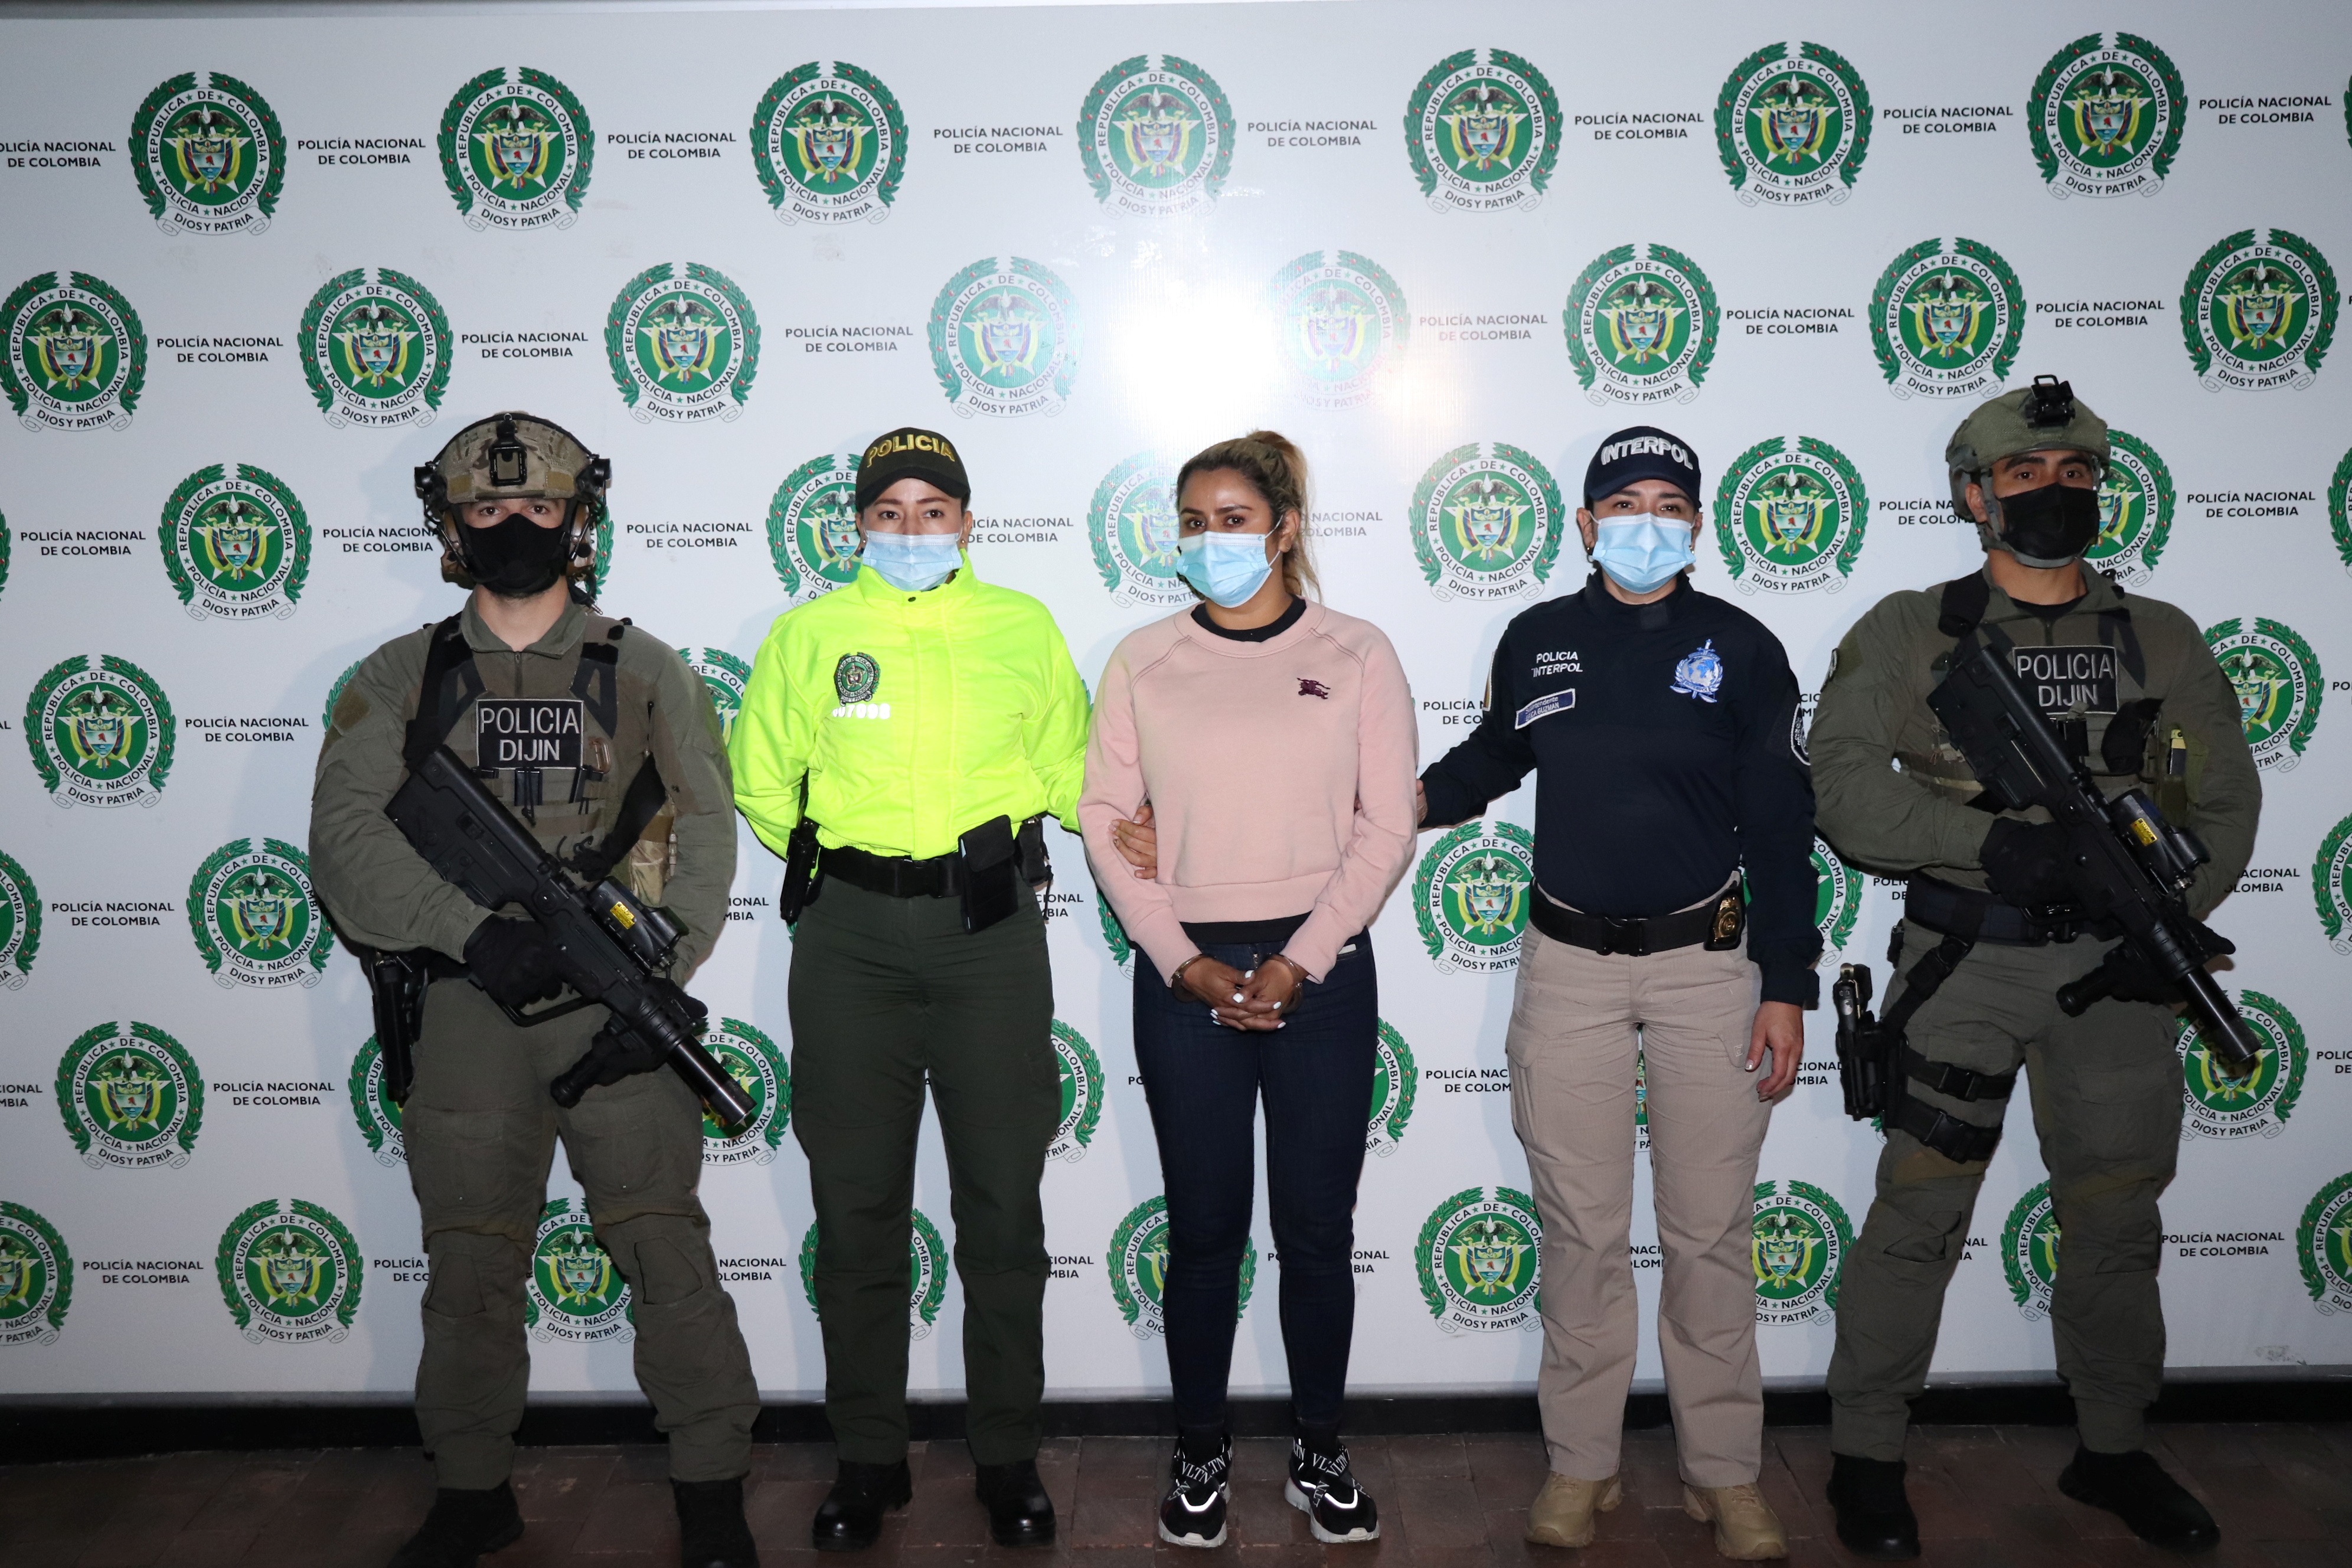 Colombian National Police officers pose for a photo with Nini Johana Usuga, alias 'La Negra', sister of 'Otoniel', top leader of the organized armed group Clan del Golfo, after her arrest in Sabaneta, Colombia March 18, 2021. Colombian National Police/Handout via REUTERS 